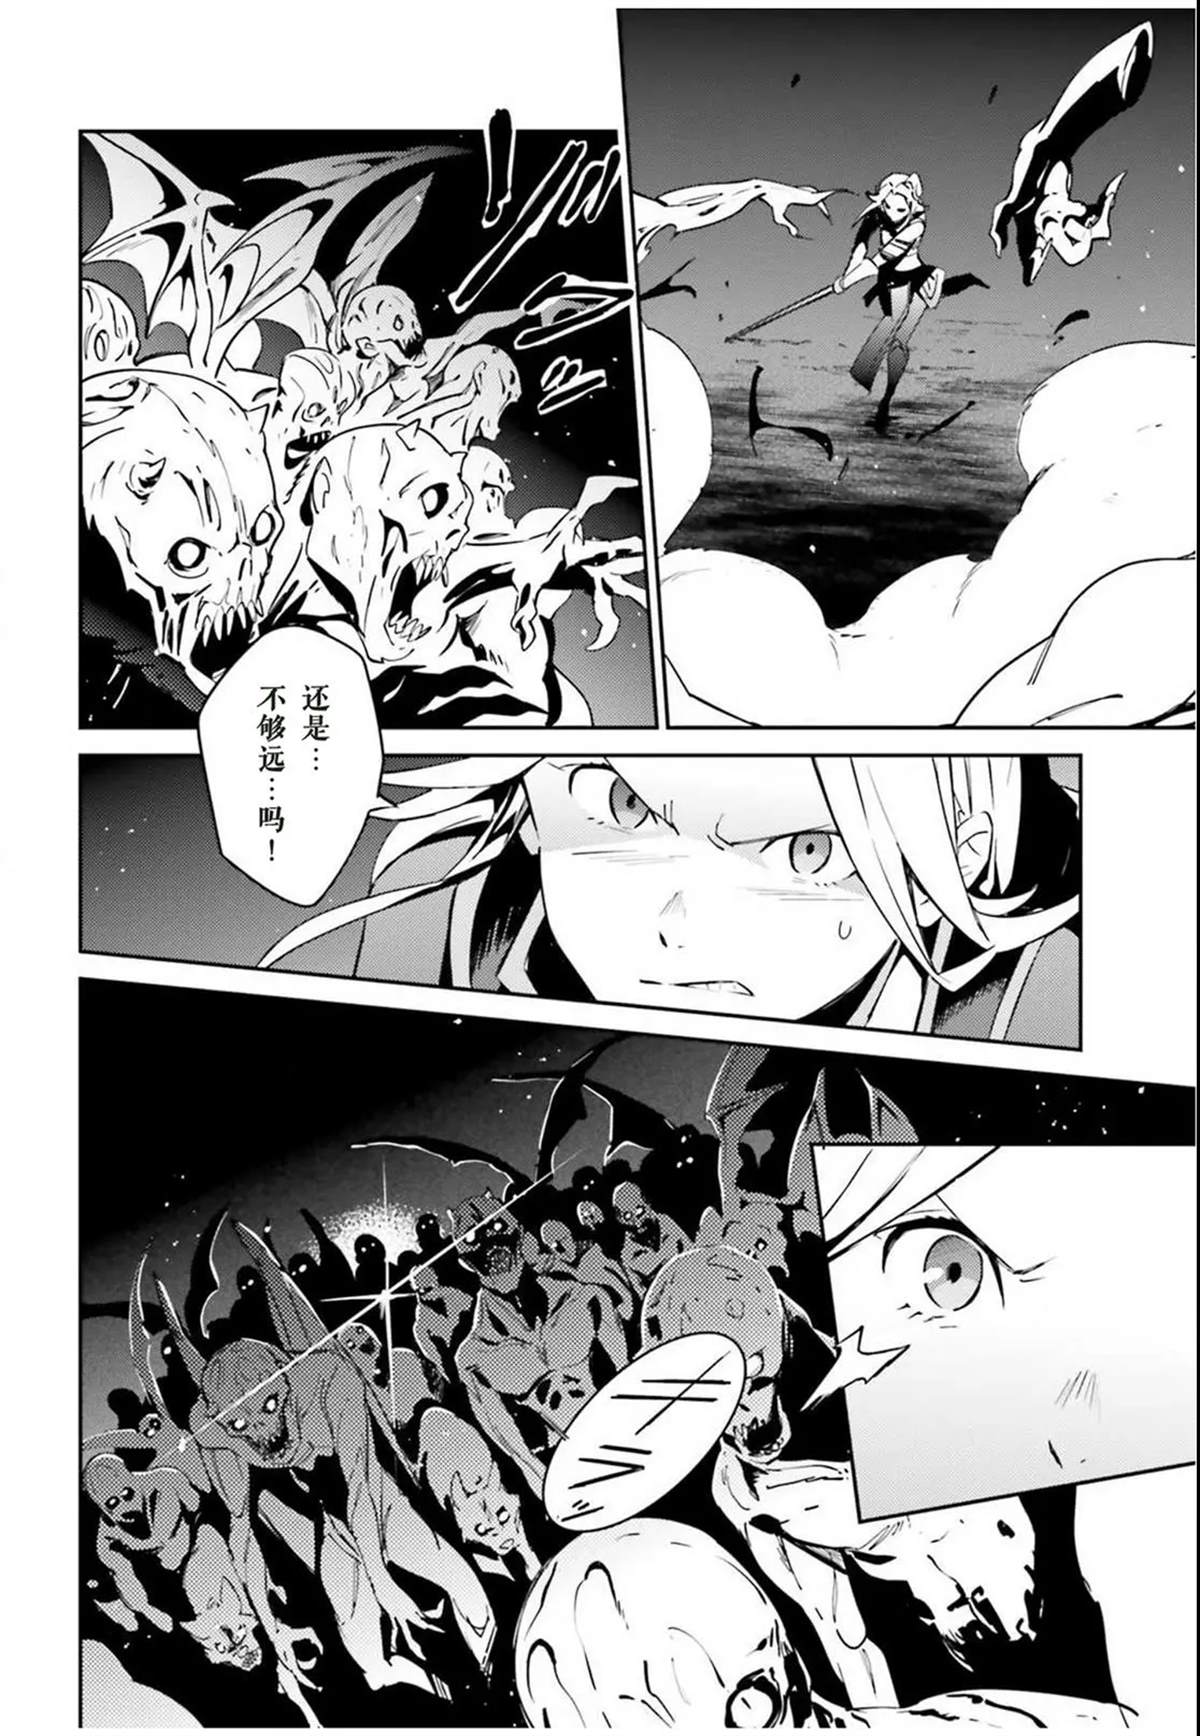 OVERLORD - 第50話 - 8